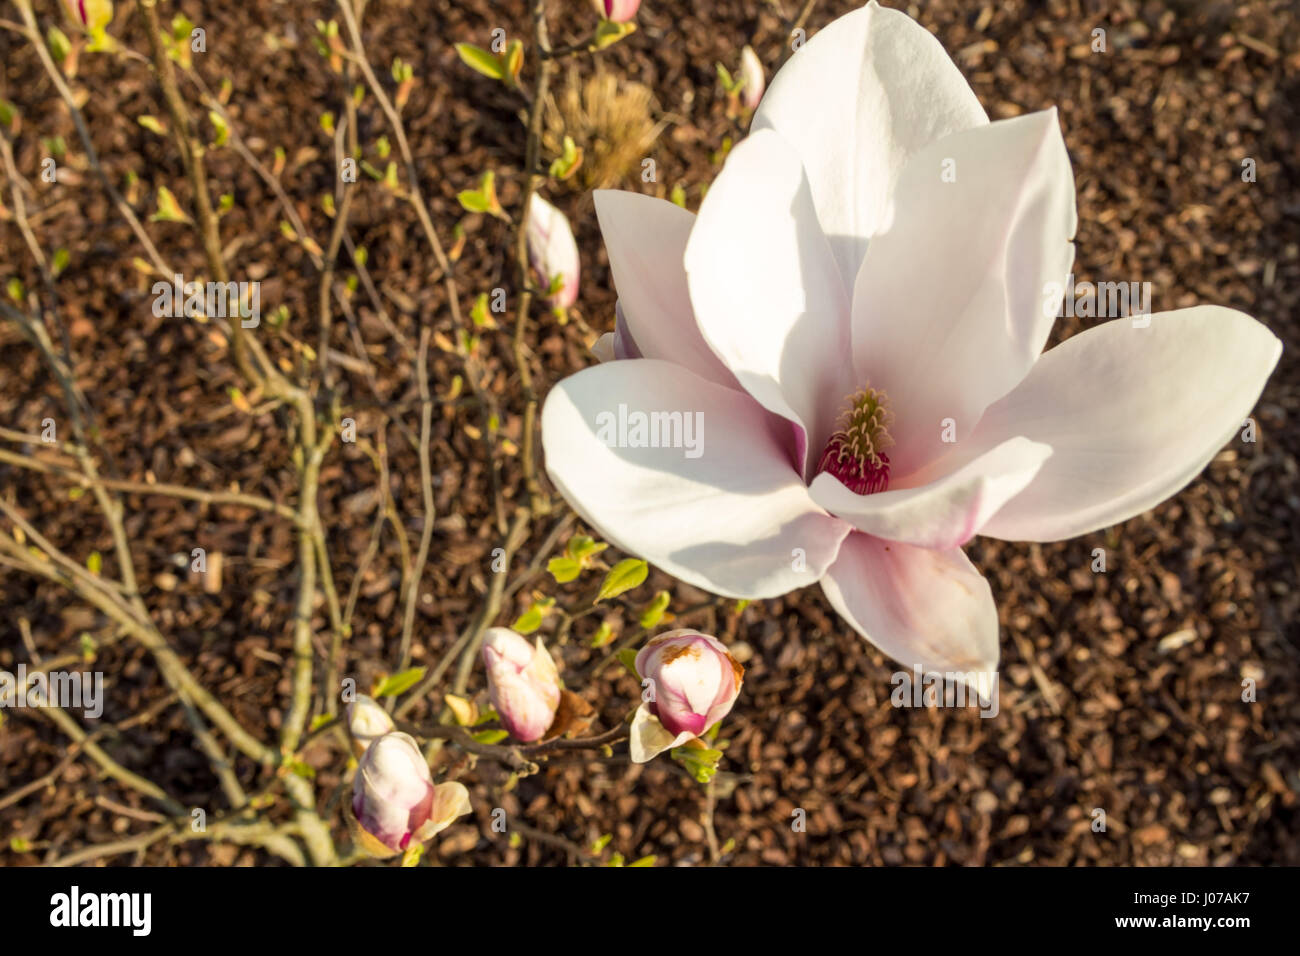 White and pink bloomed magnolia flower in the spring season on the magnolia tree. Wood chips on the floor as background. Magnolia blossom. Stock Photo